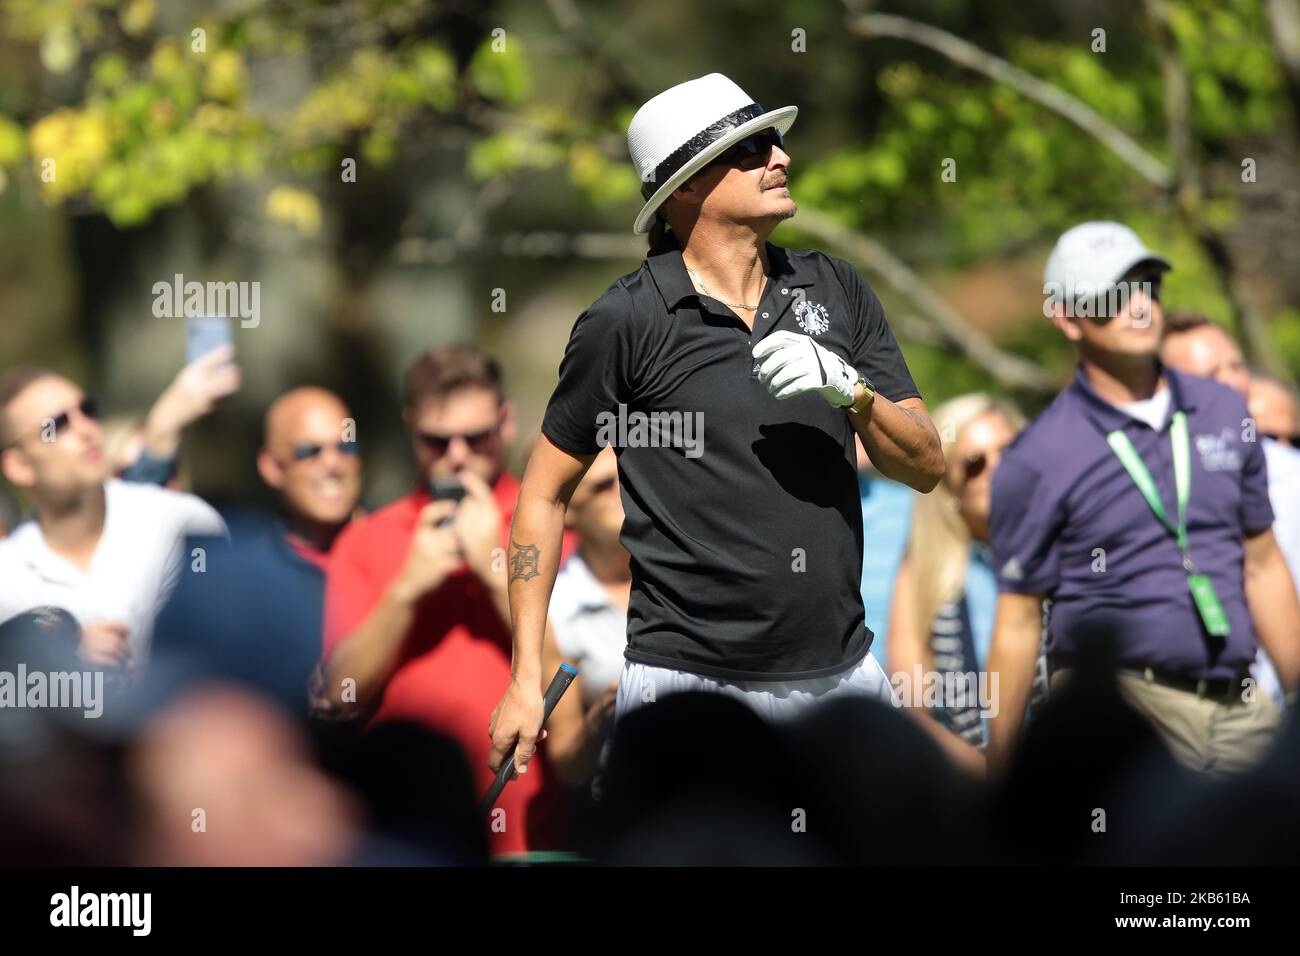 Michigan native Kid Rock follows his shot from the 11th tee during a celebrity shootout at the conclusion of the second round of The Ally Challenge presented by McLaren at Warwick Hills Golf & Country Club, Grand Blanc, MI, USA Saturday, September 14, 2019. (Photo by Jorge Lemus/NurPhoto) Stock Photo